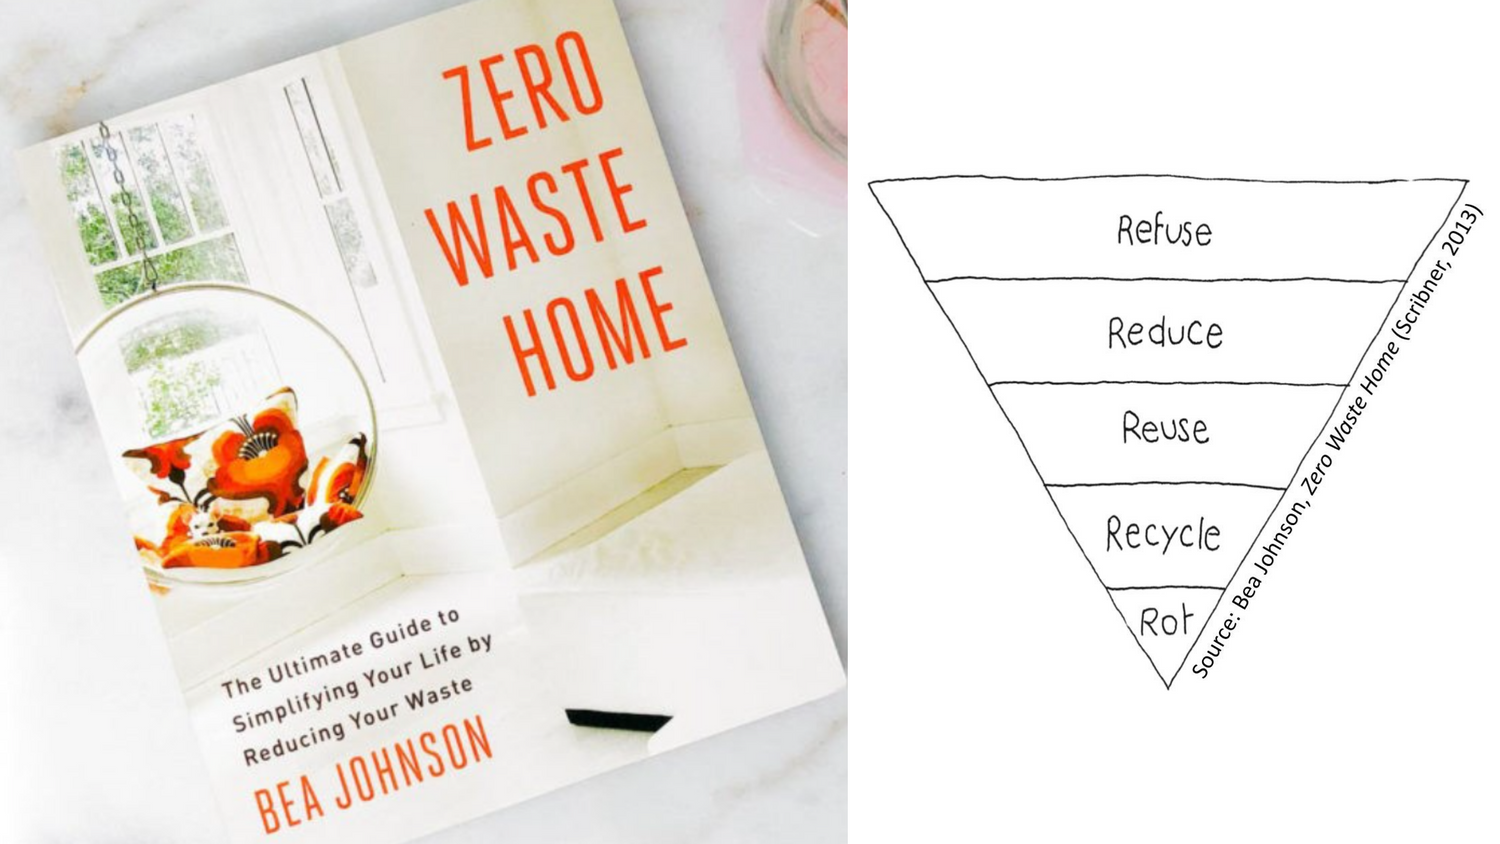 The 5 Rs of a Zero Waste lifestyle